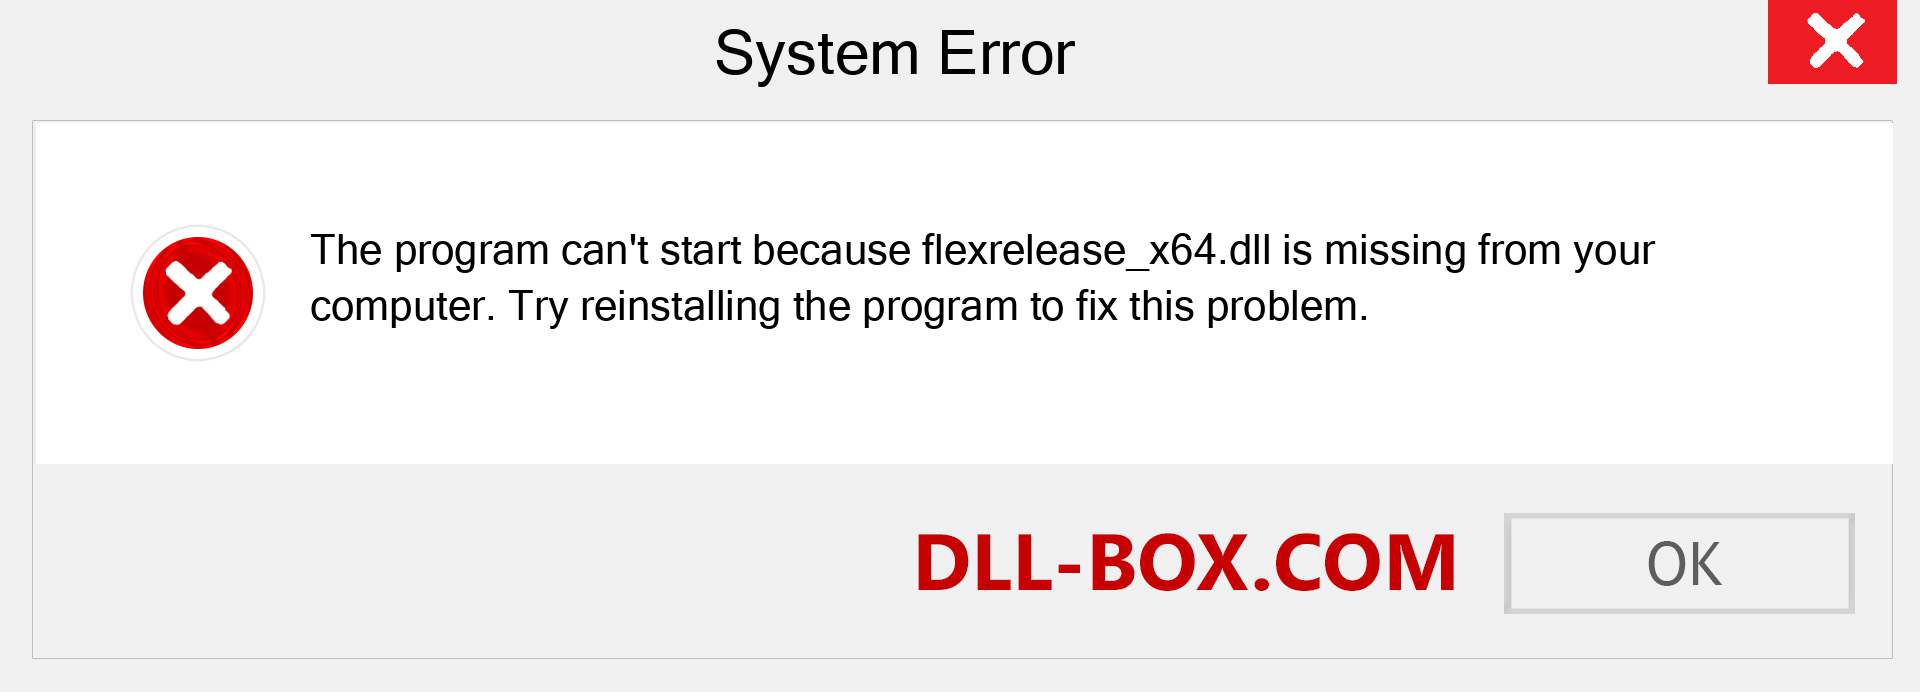  flexrelease_x64.dll file is missing?. Download for Windows 7, 8, 10 - Fix  flexrelease_x64 dll Missing Error on Windows, photos, images